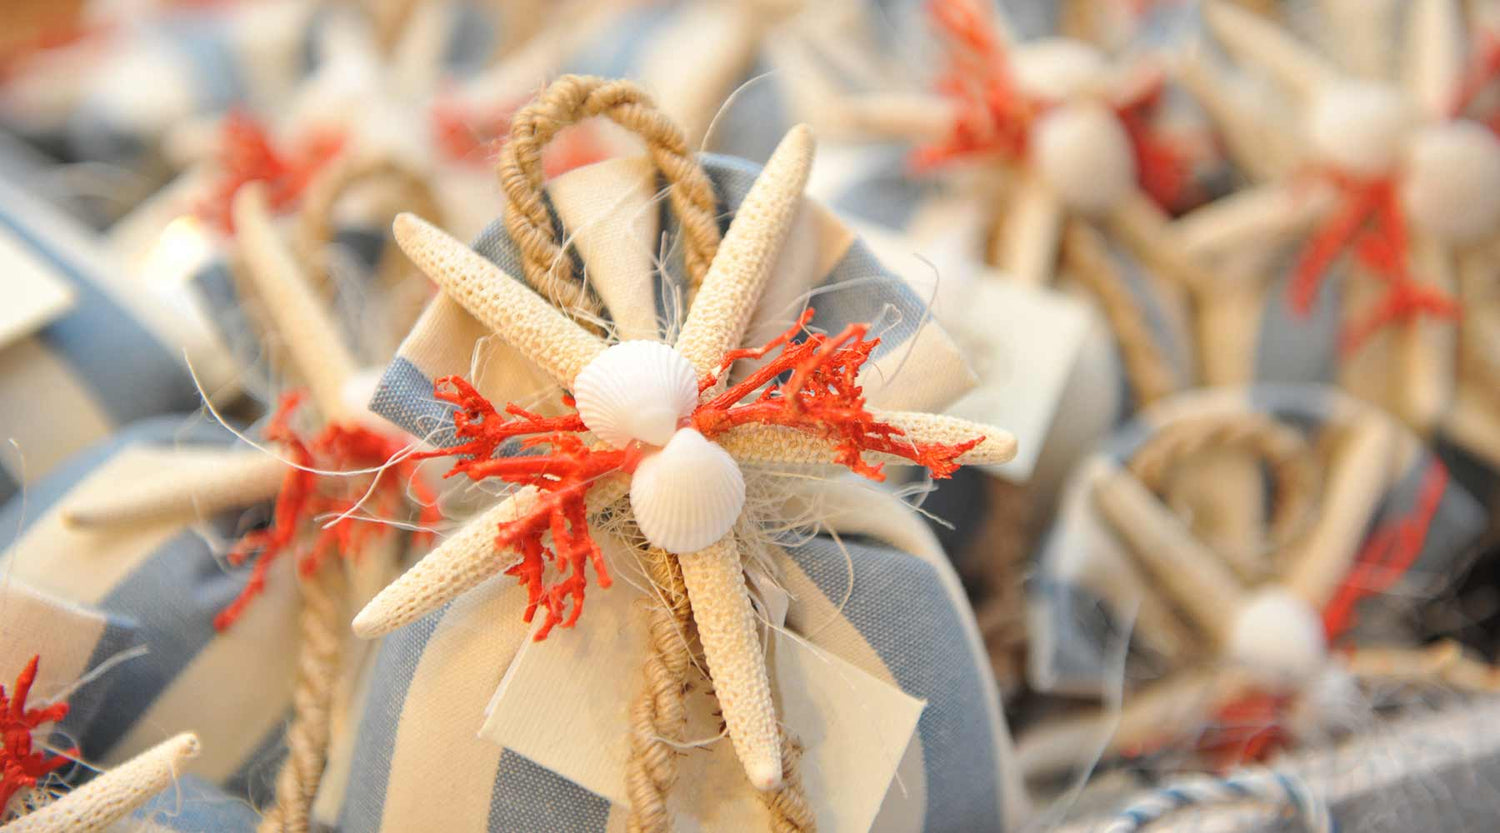 13 Destination Wedding Party Favors for Traveling Guests